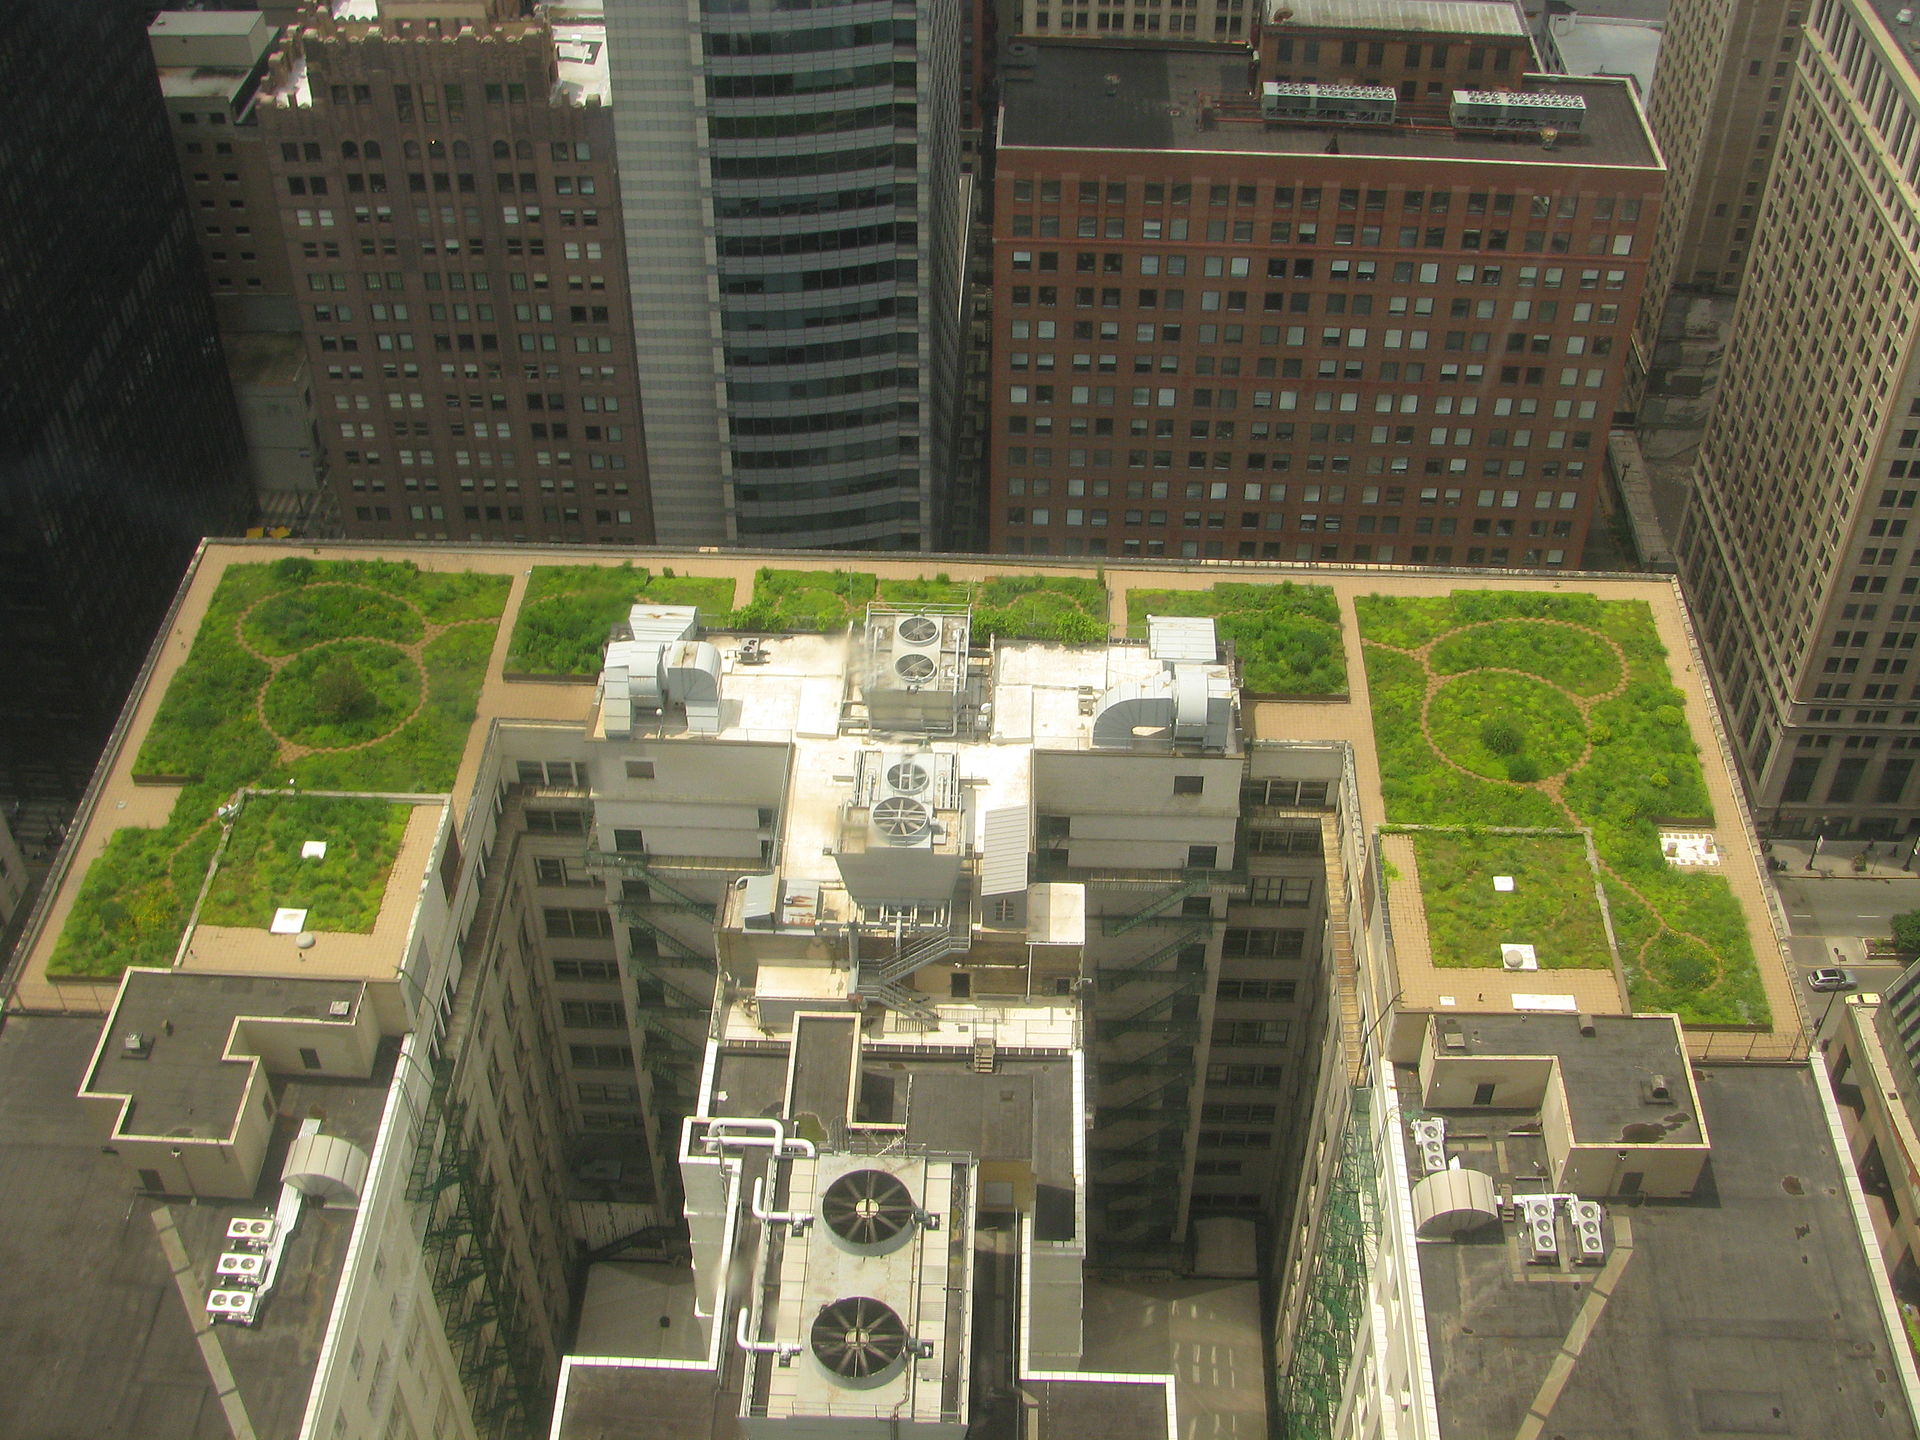 Aerial view of the green roof of Chicago City Hall